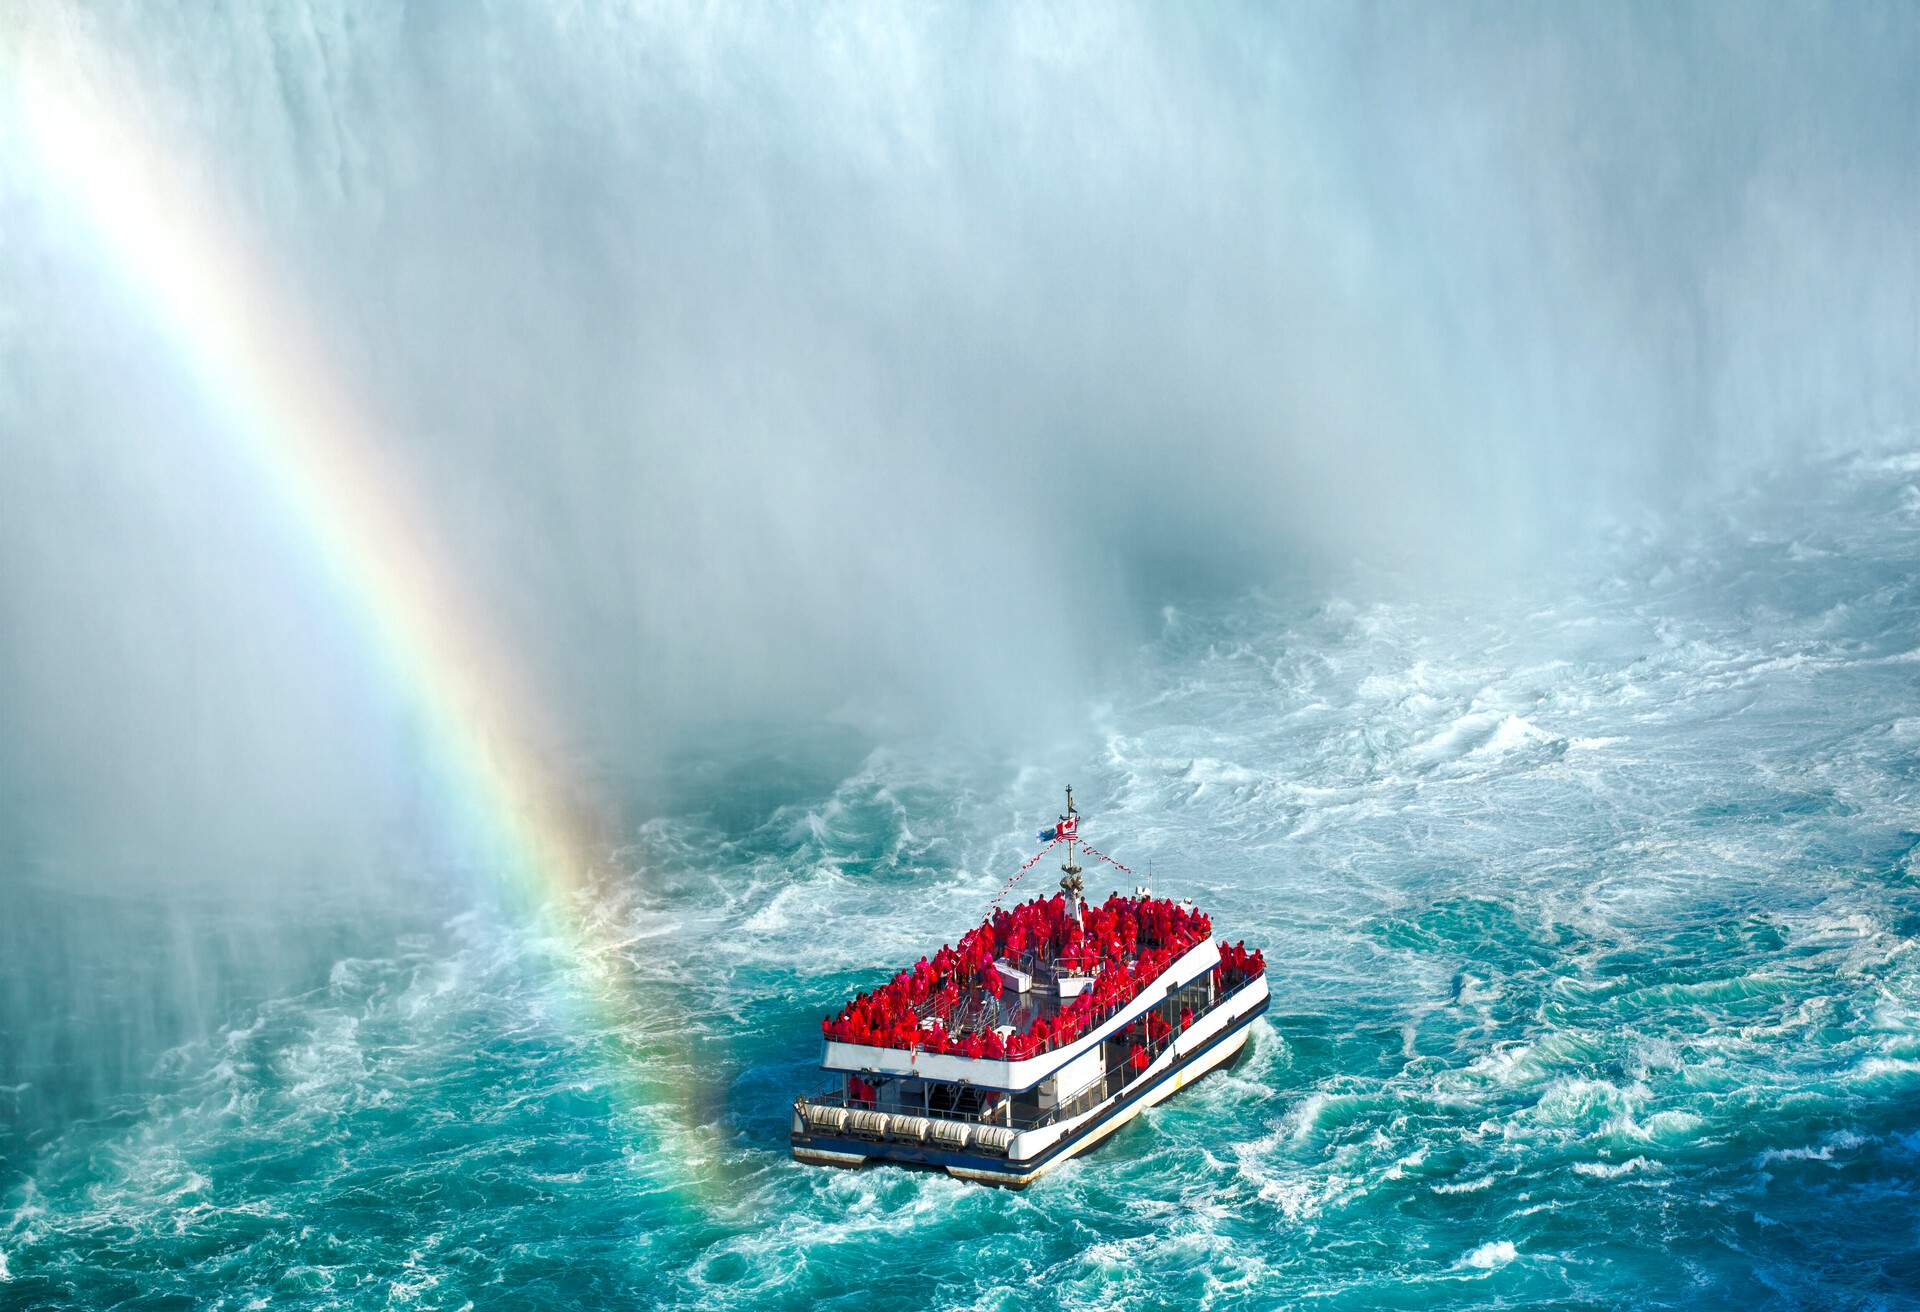 Passengers donning red plastic coats relish a thrilling boat ride at the base of Niagara Falls, with a radiant rainbow embellishing the breathtaking scene.